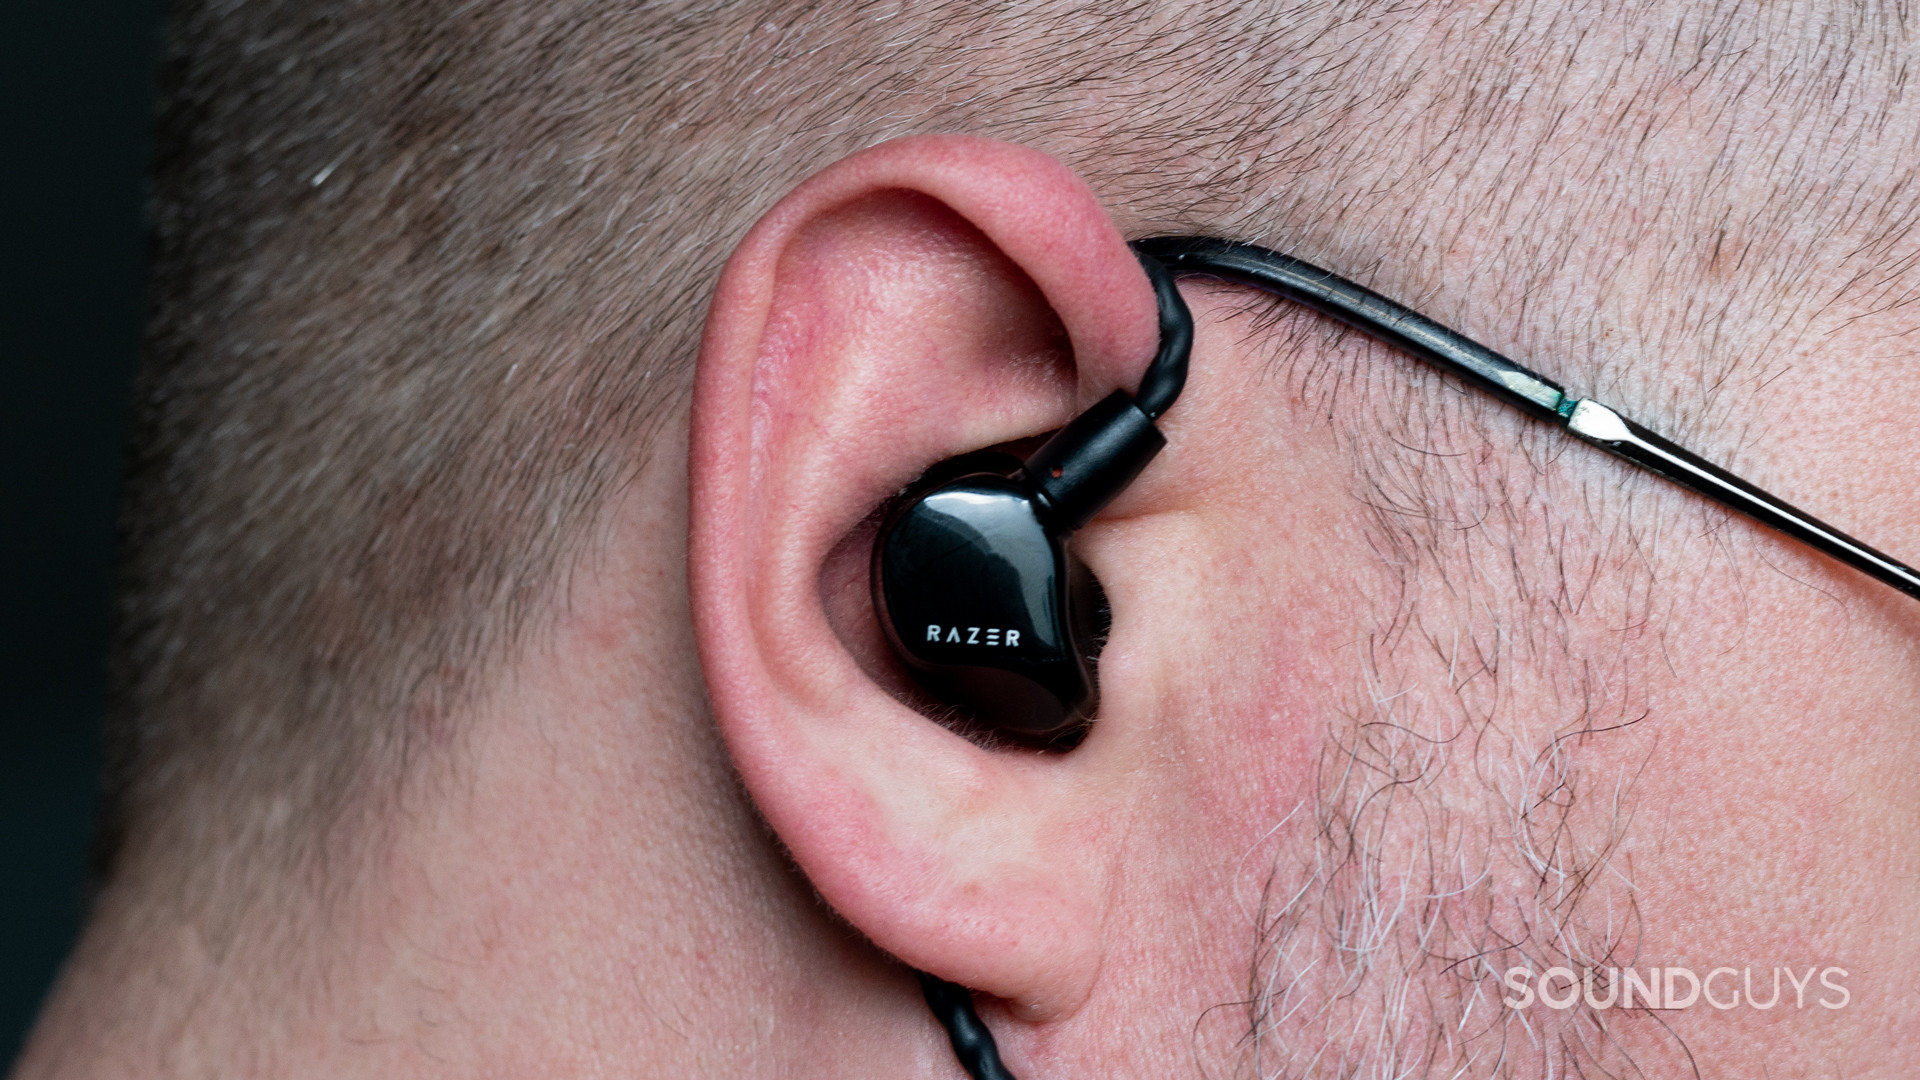 The Razer Moray being used by a short-haired, bespectacled man.